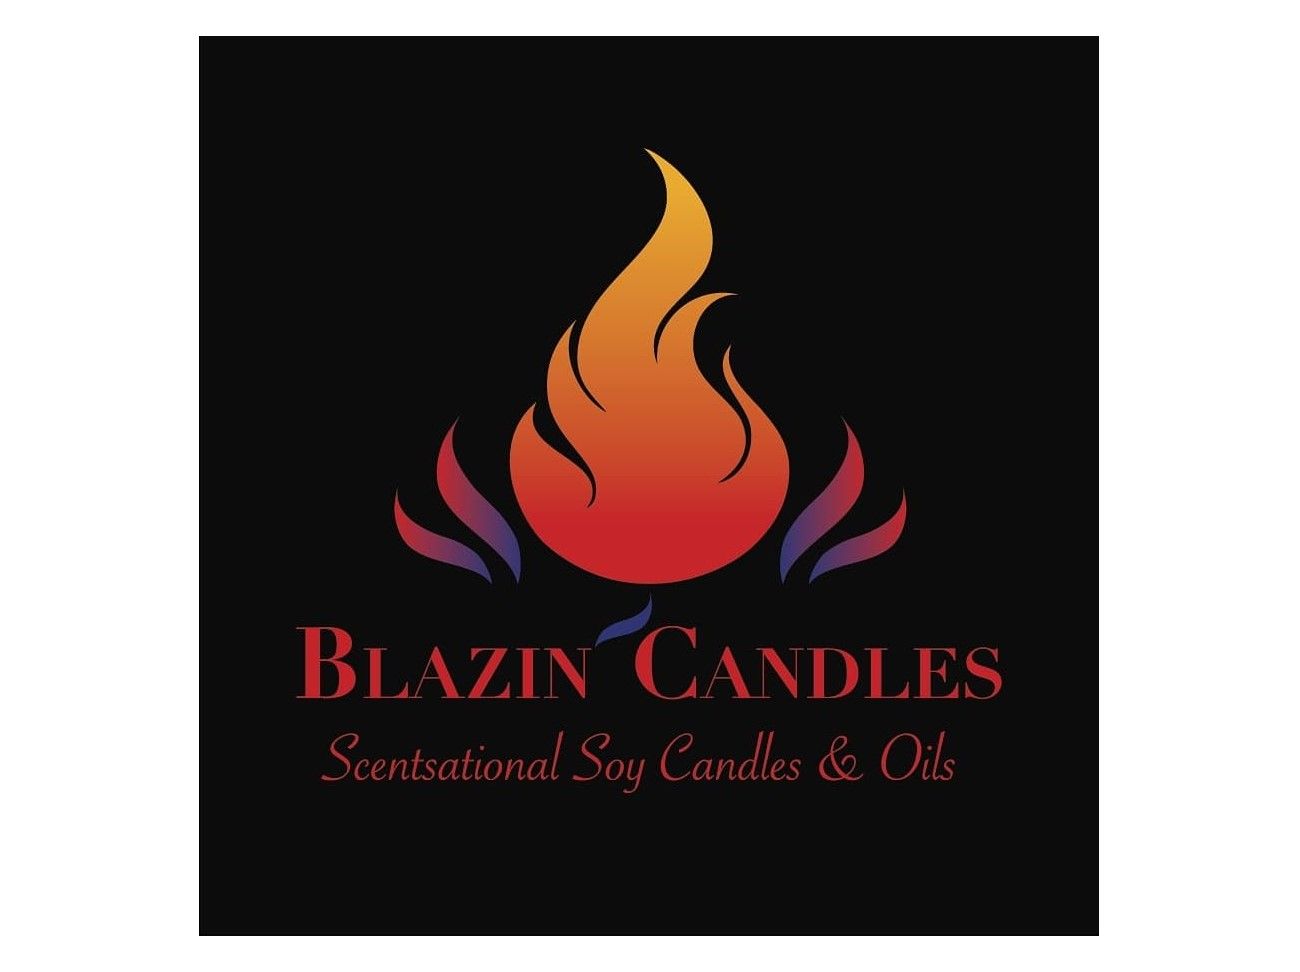 A Hint of Passion Under Every Seal - Blazin’ Candles